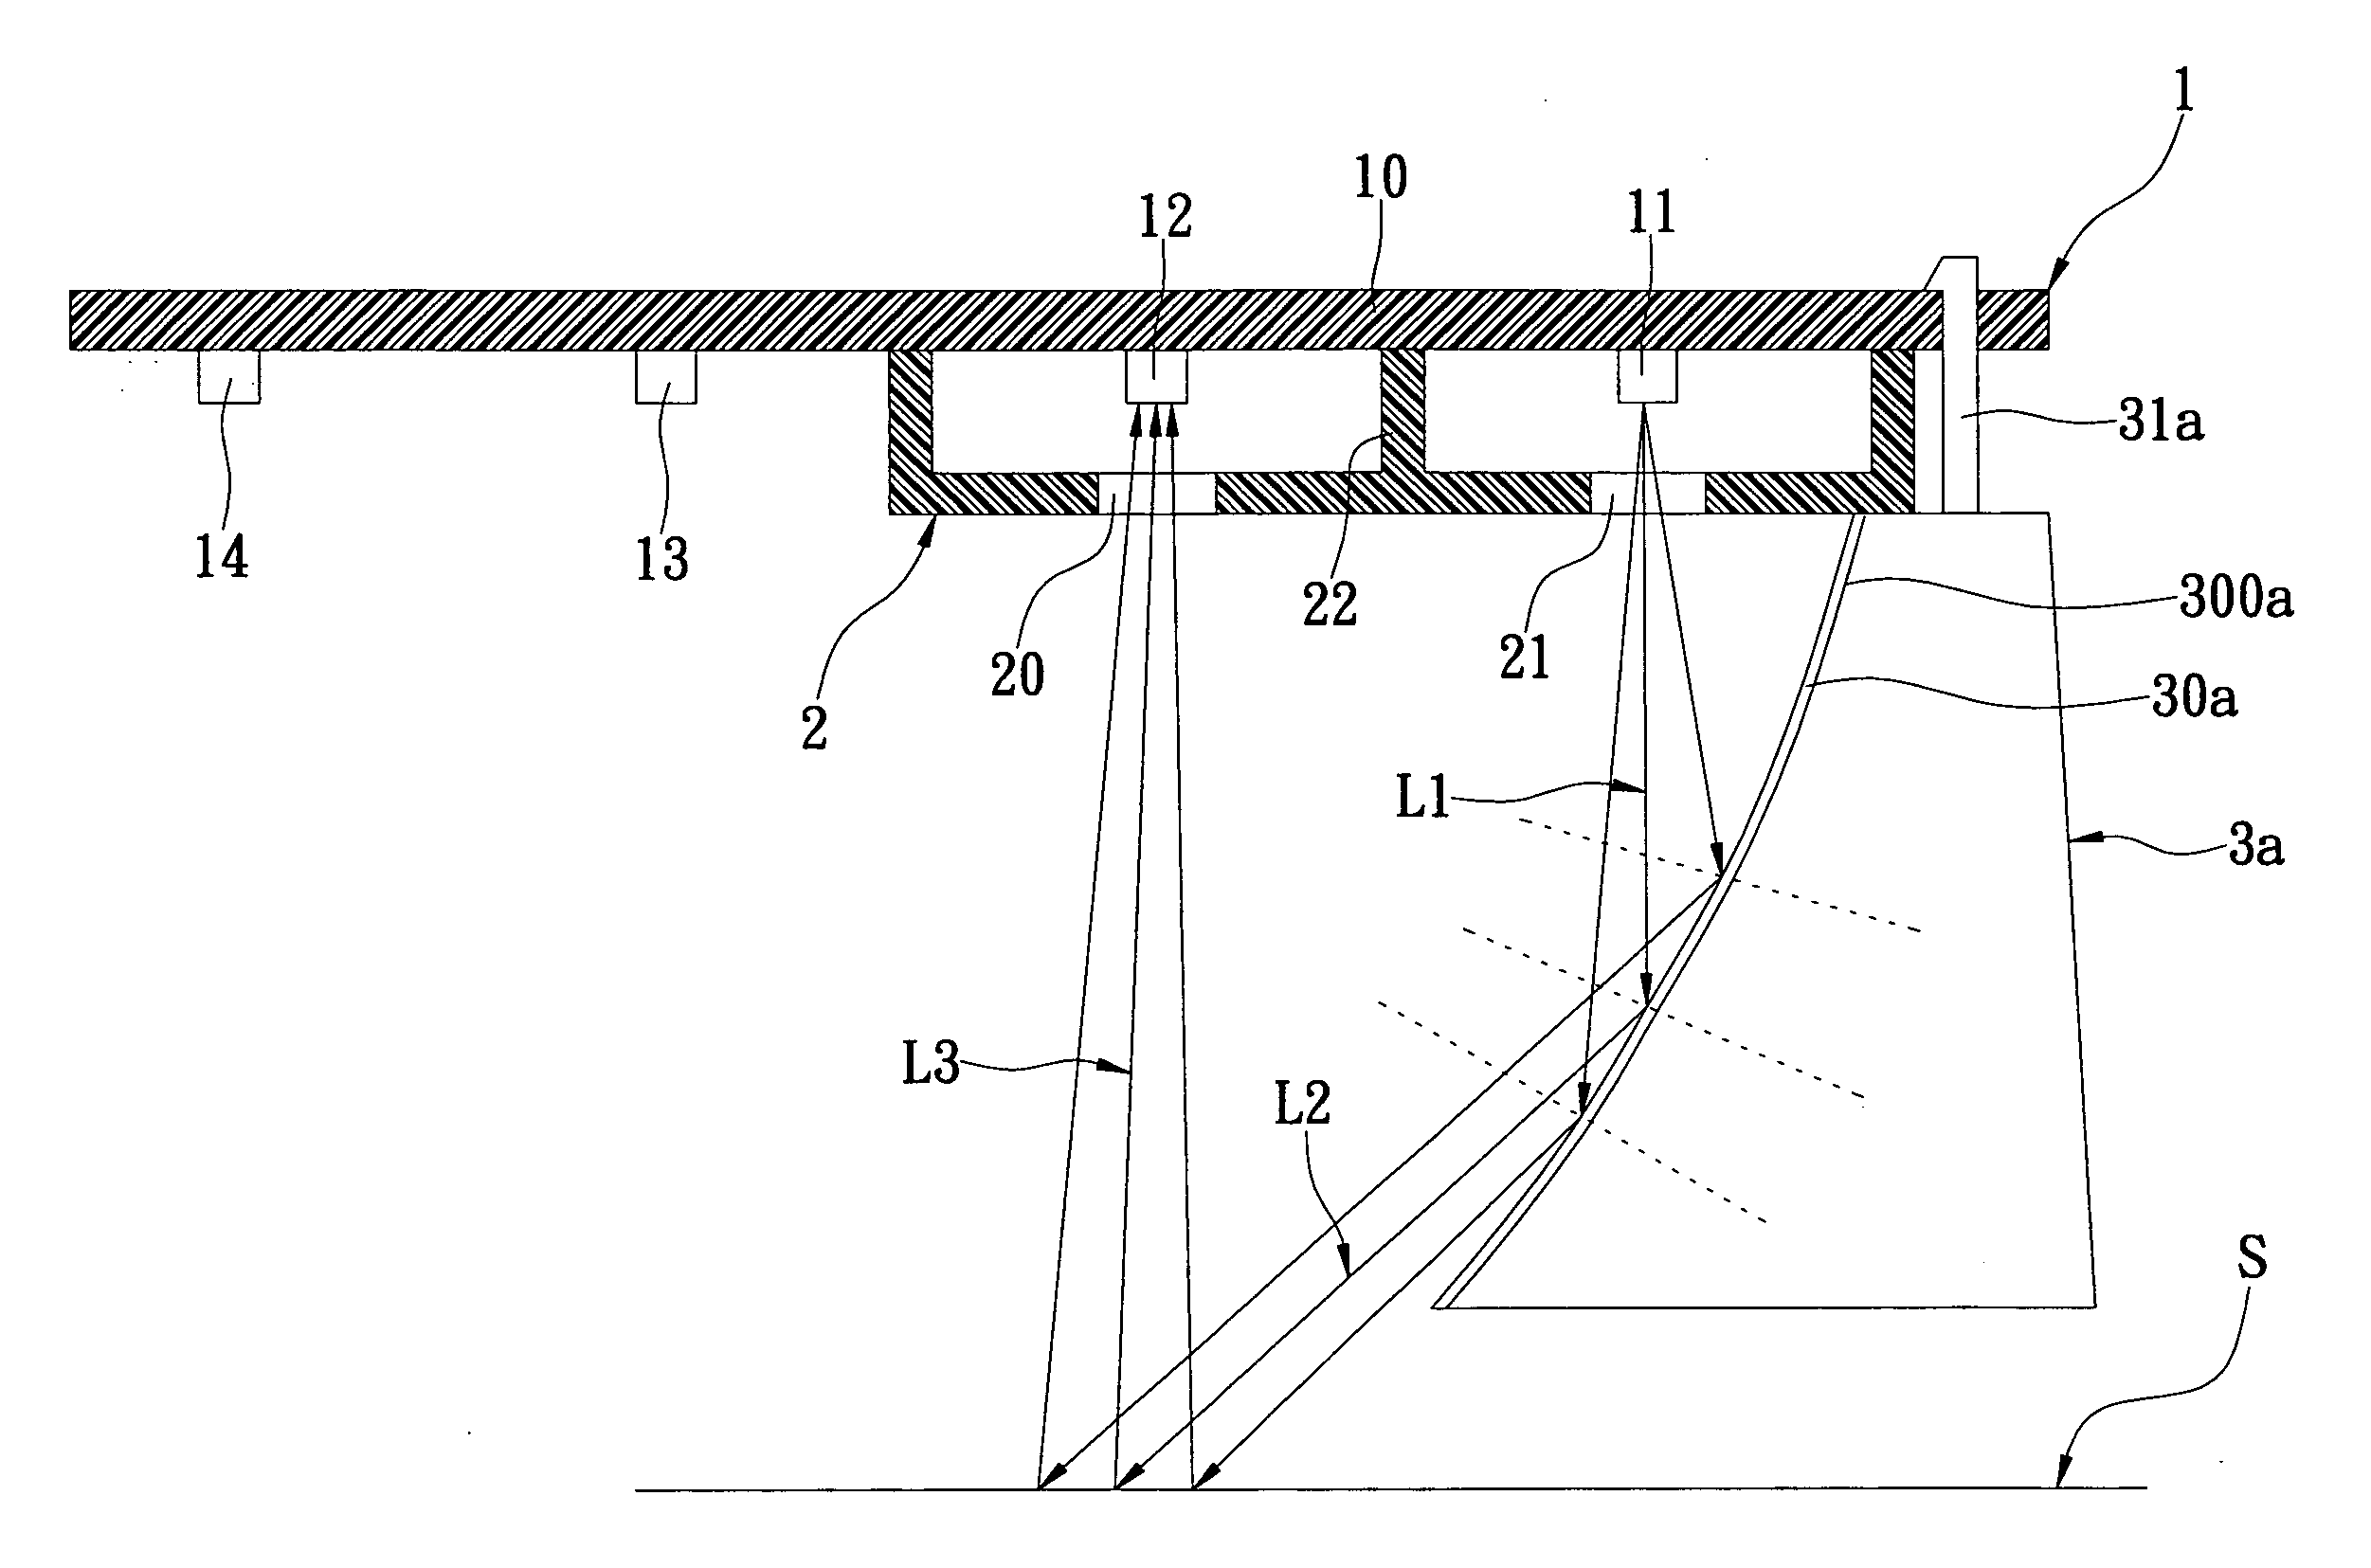 Motion-detecting module with a built-in light source